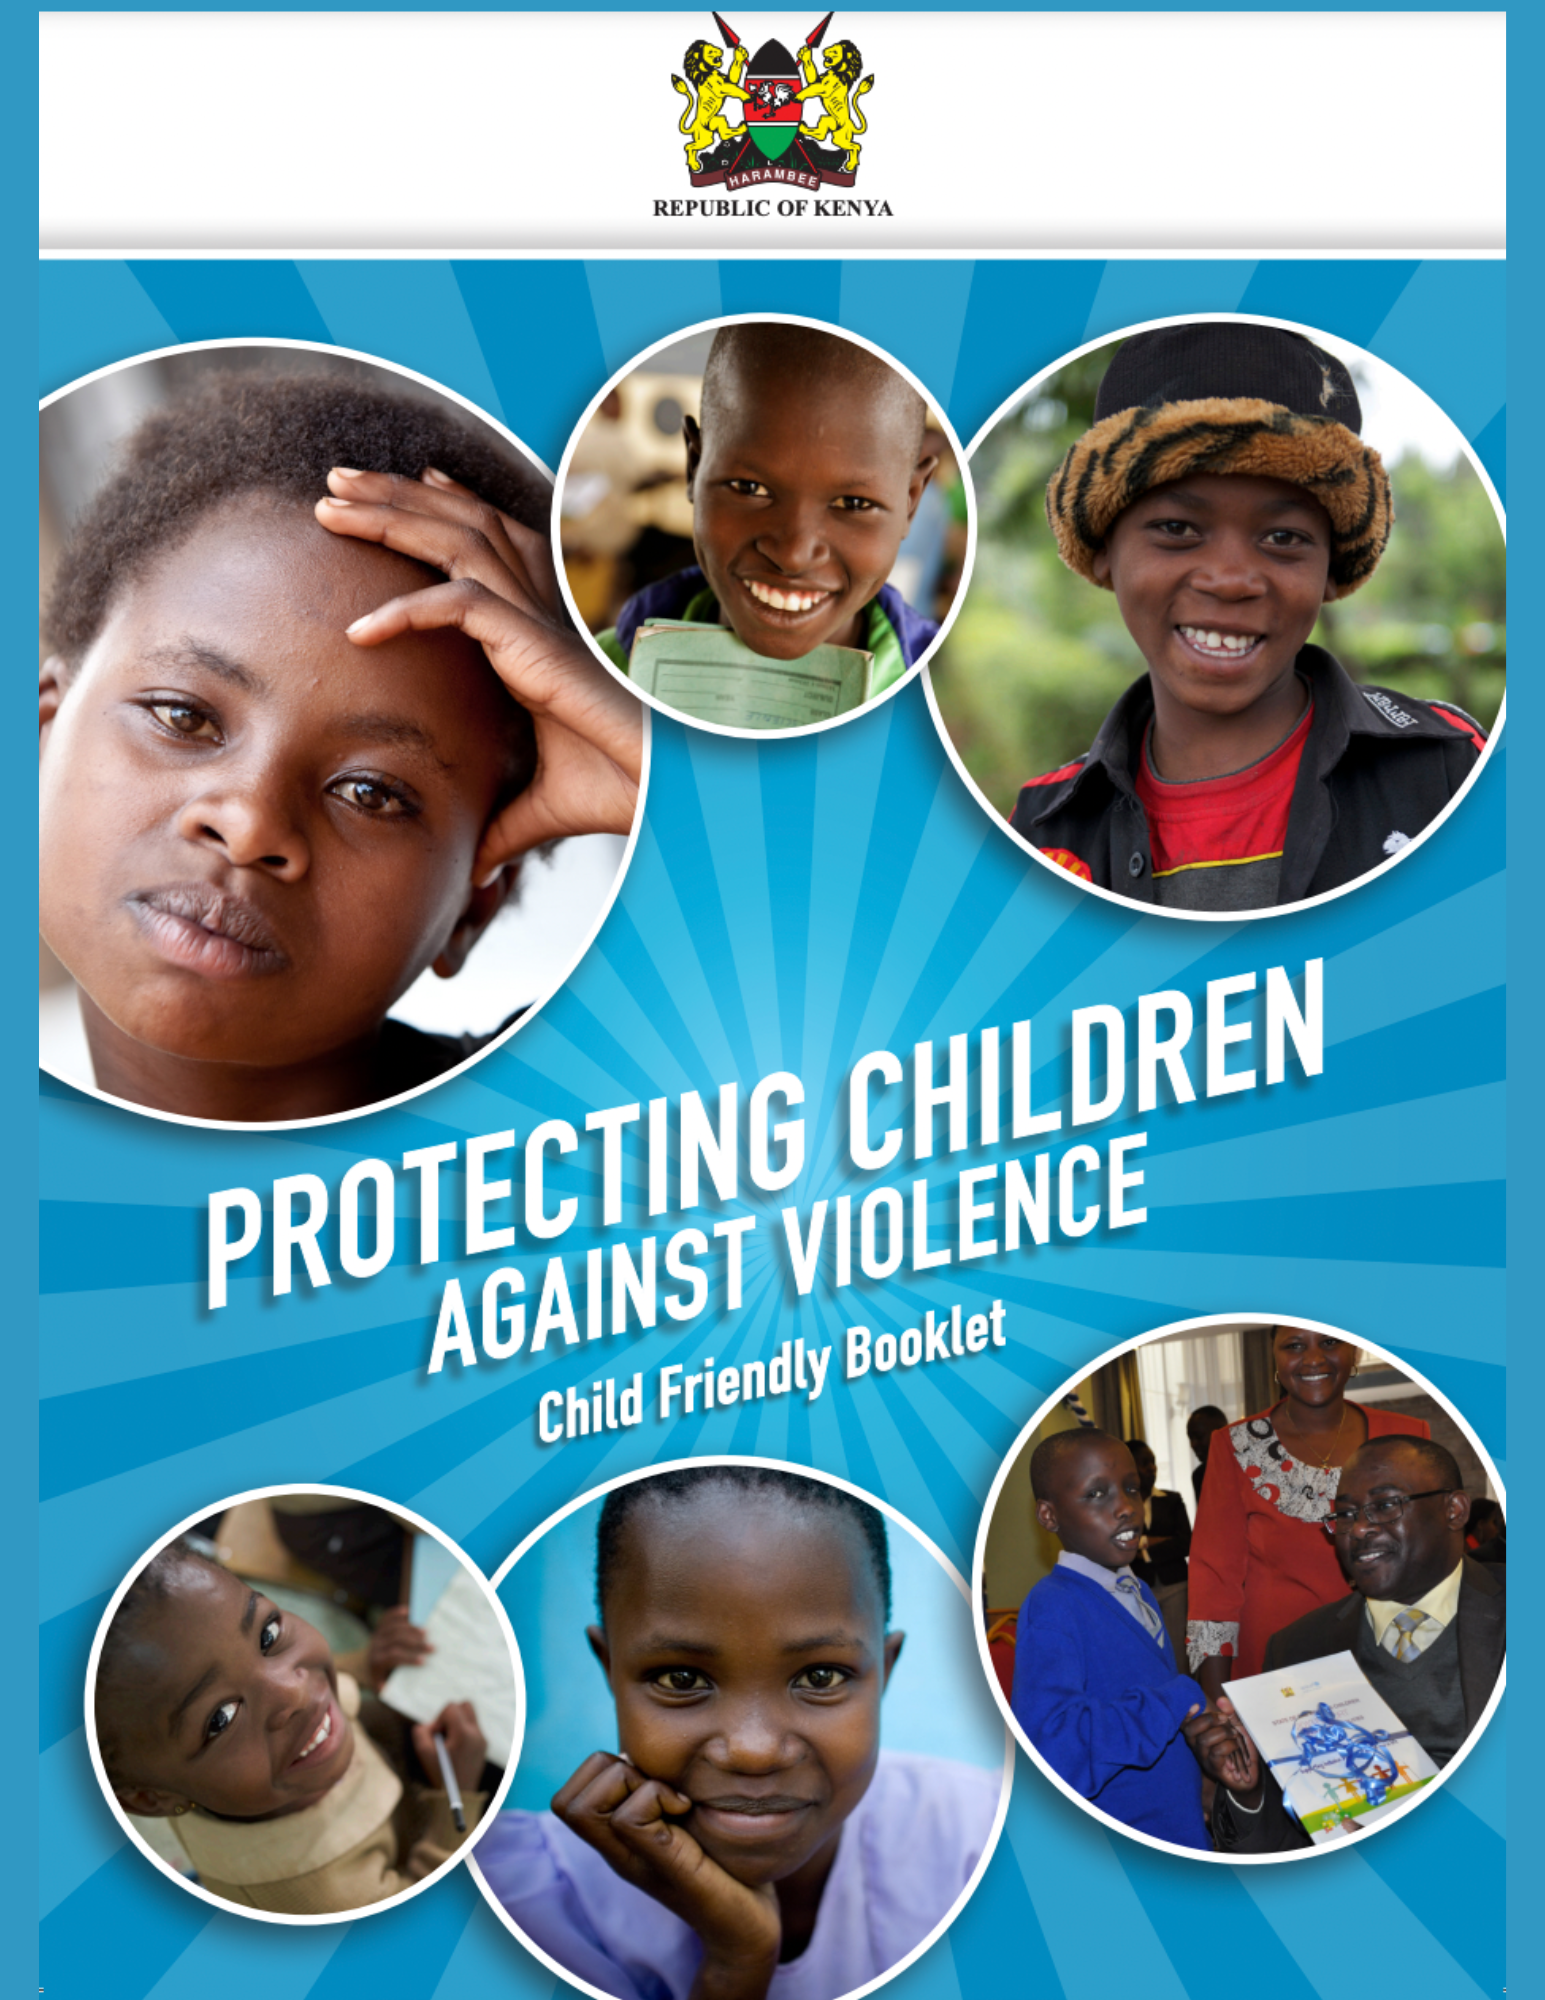 Protecting children against violence